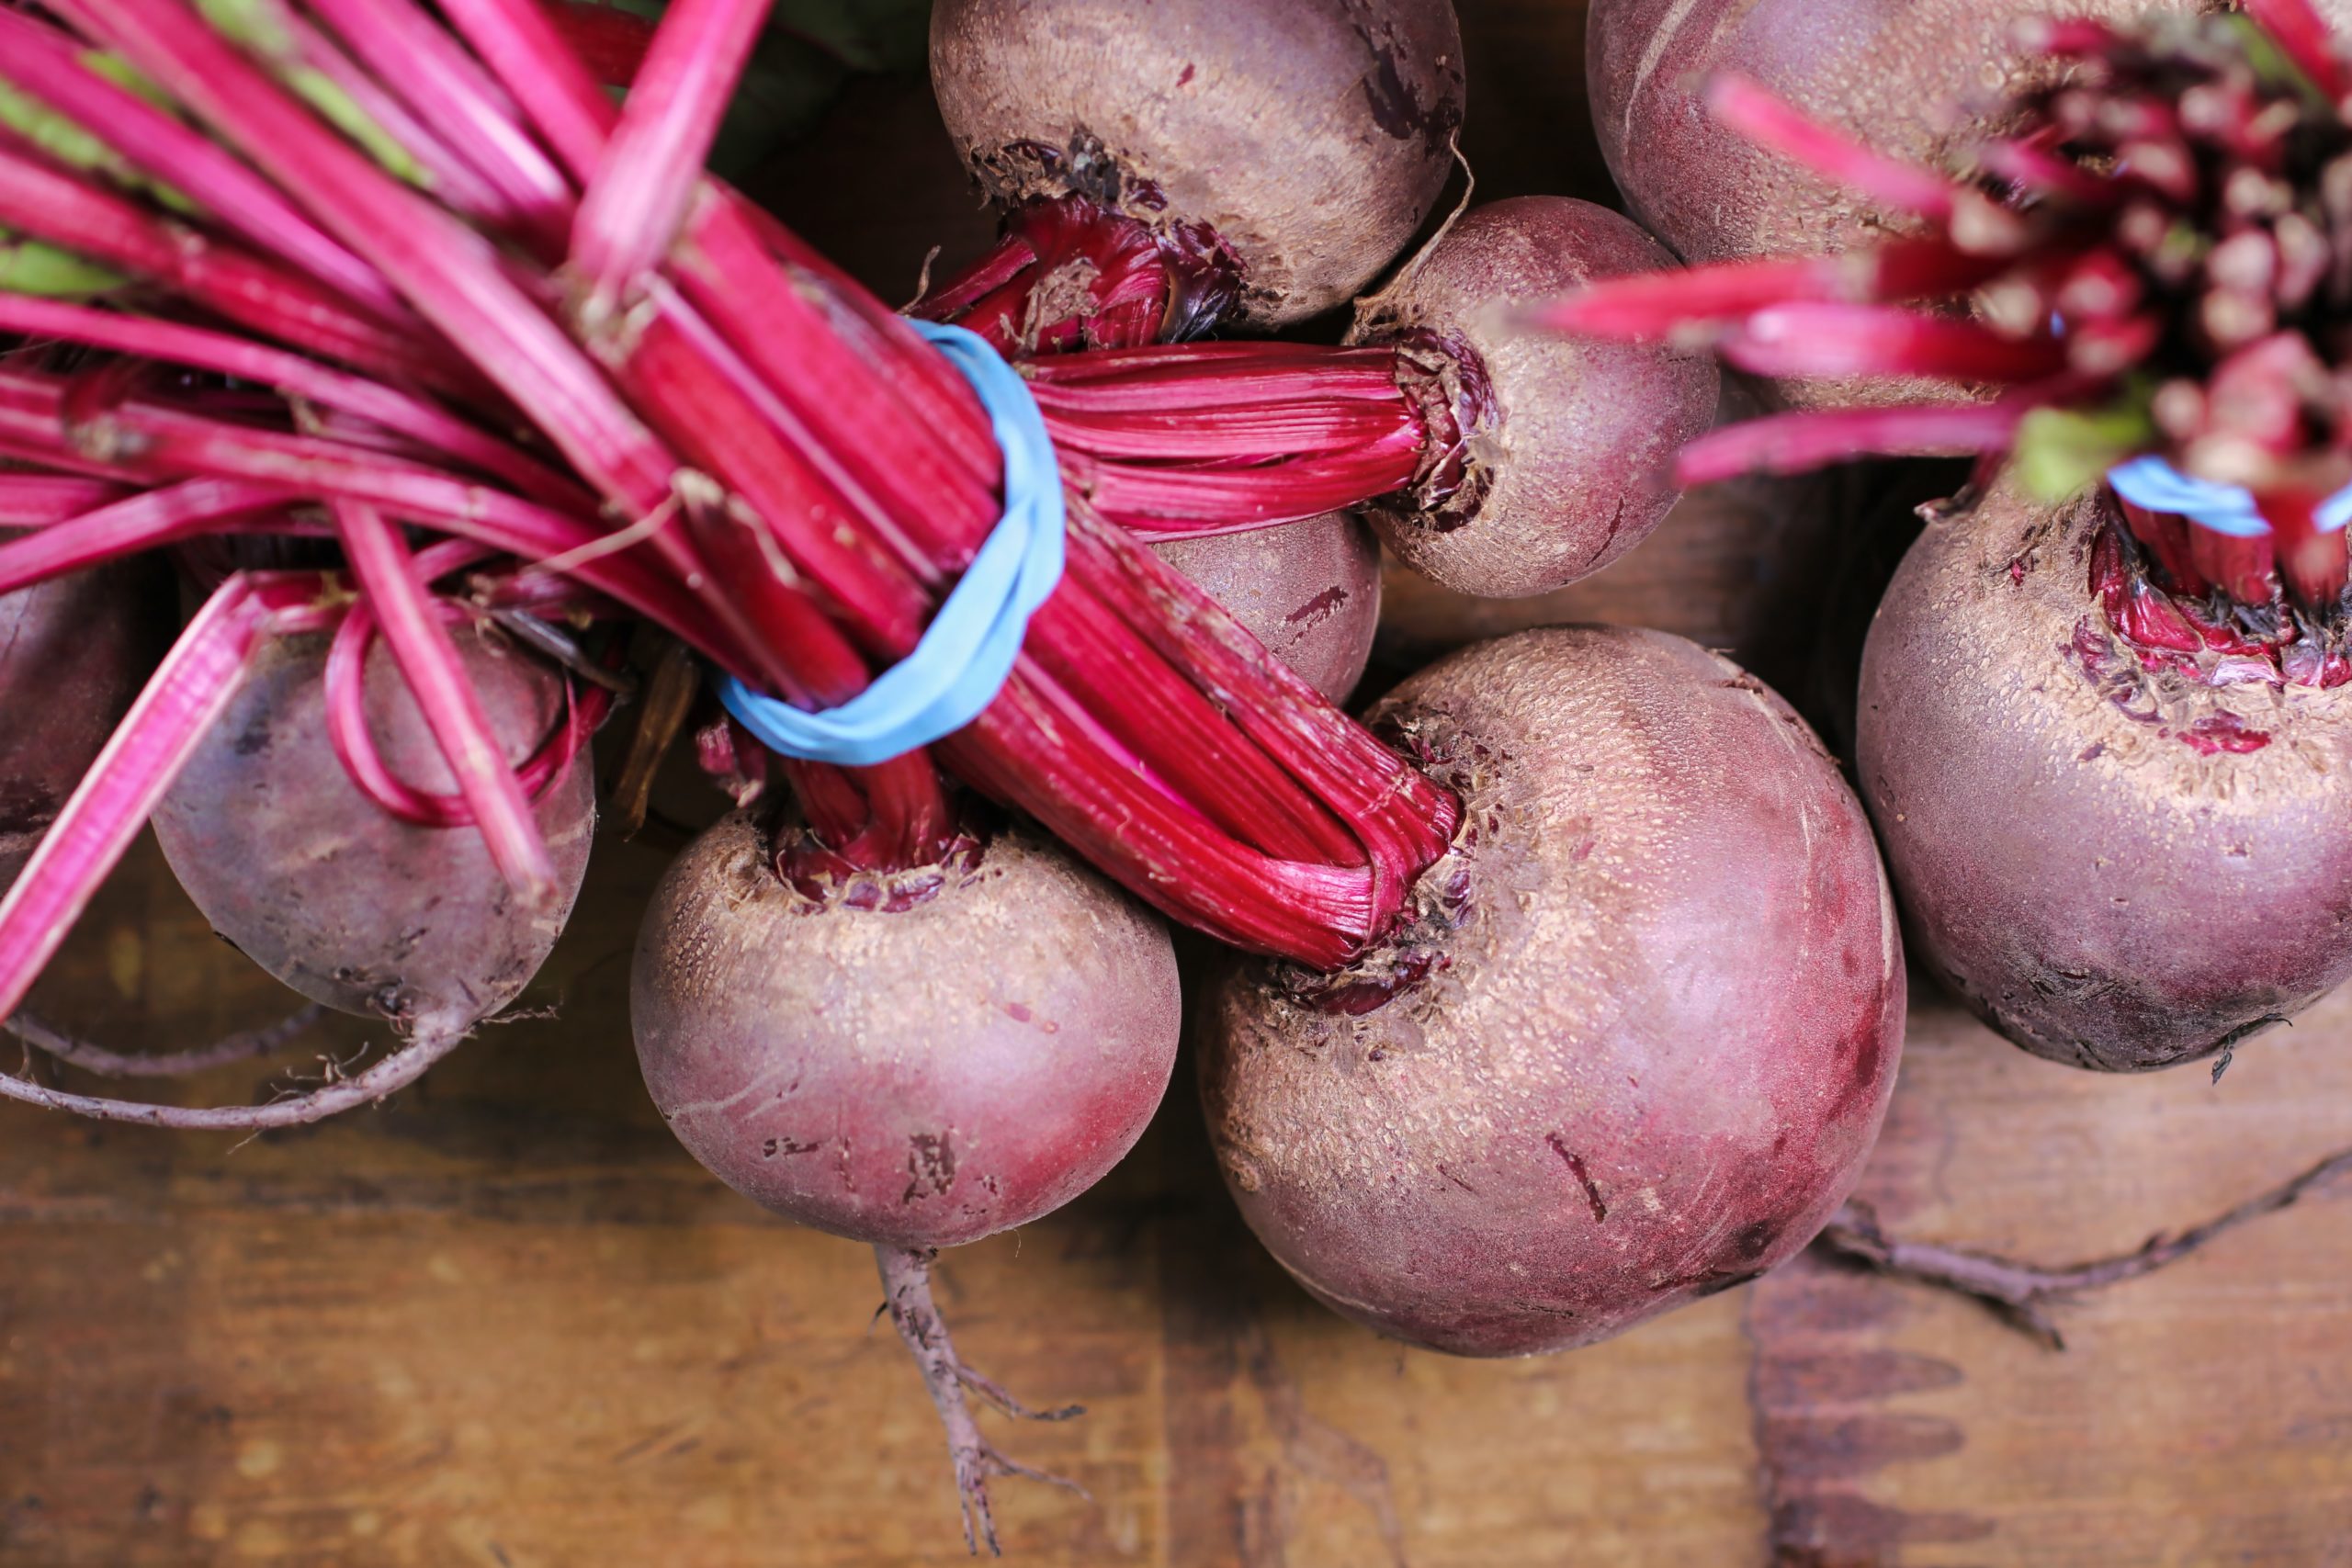 How To Cook Beets